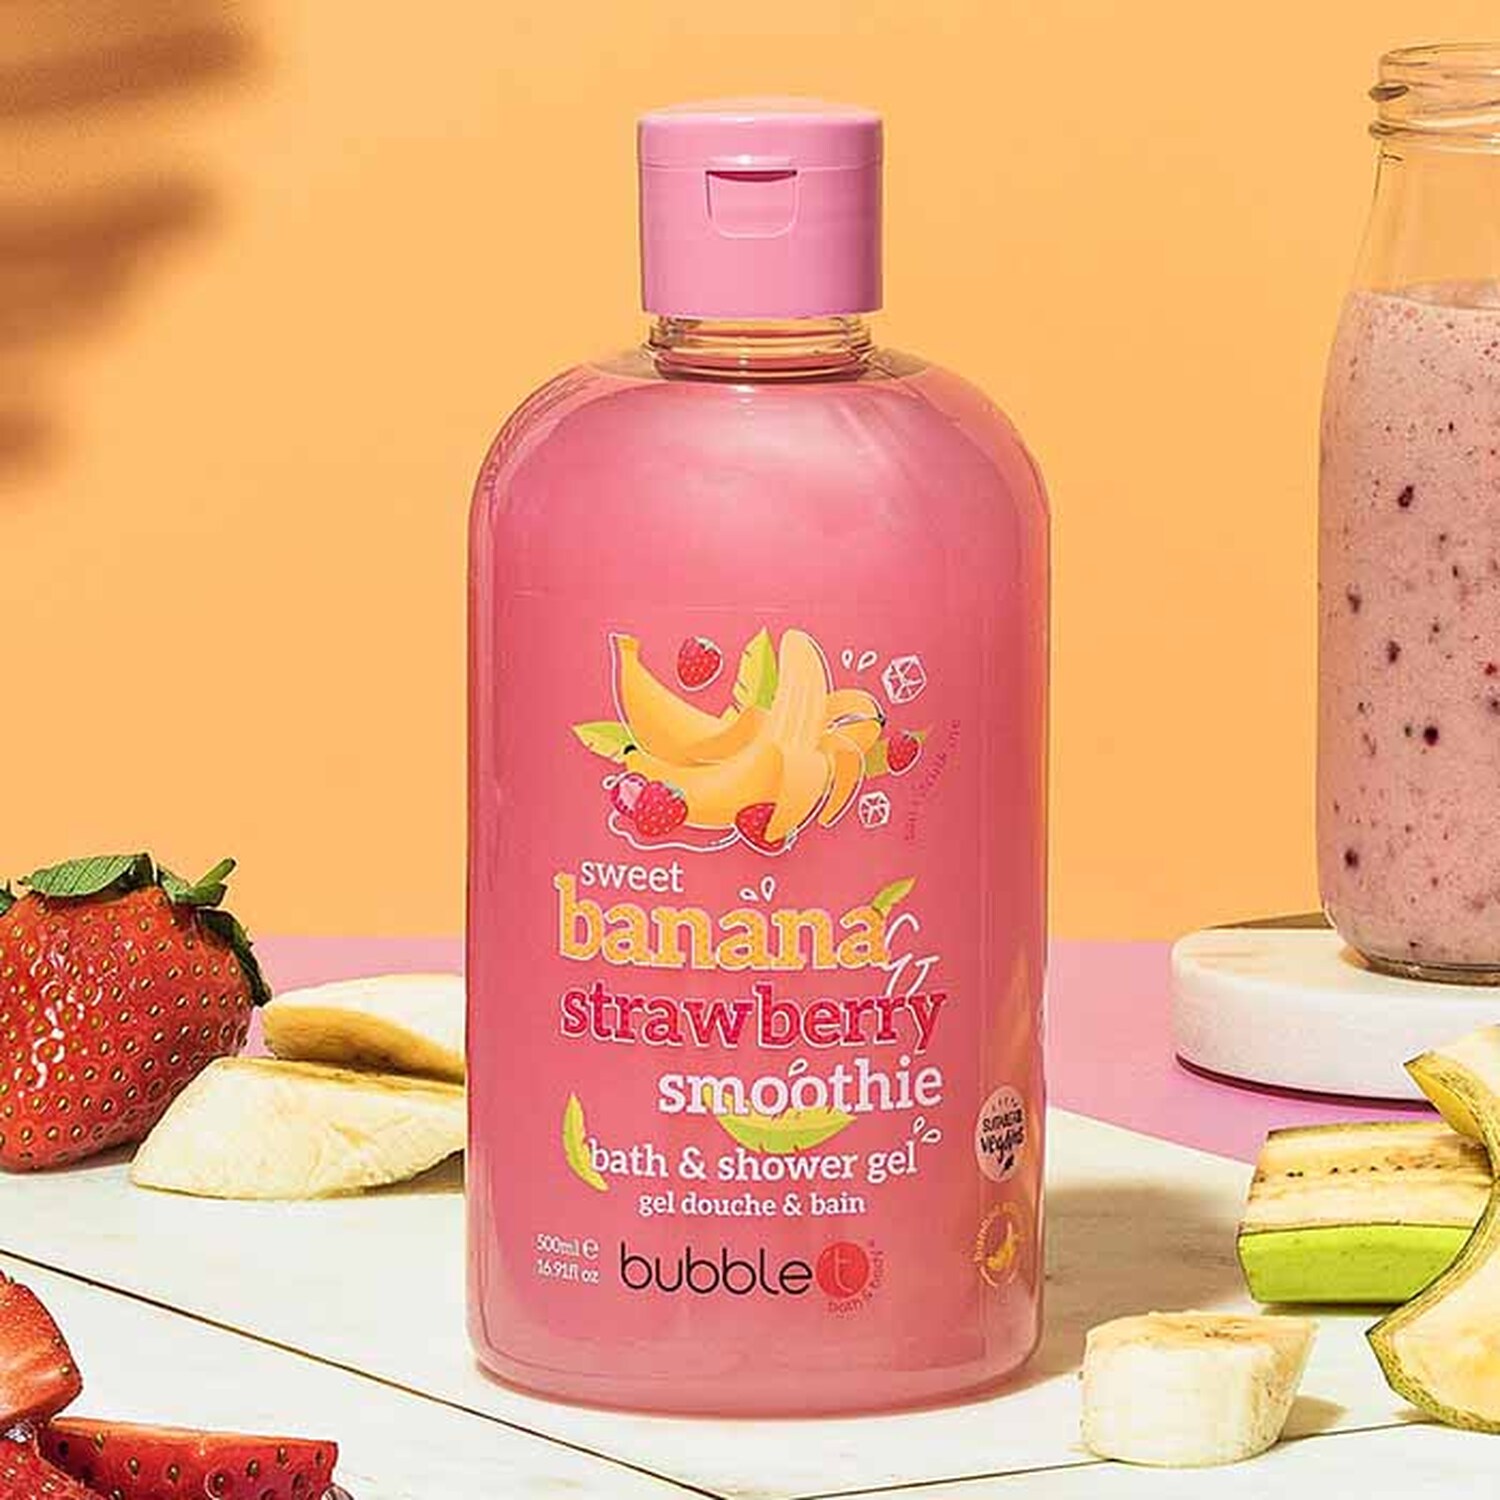 Banana and Strawberry Smoothie Shower Gel 500ml - Pink Image